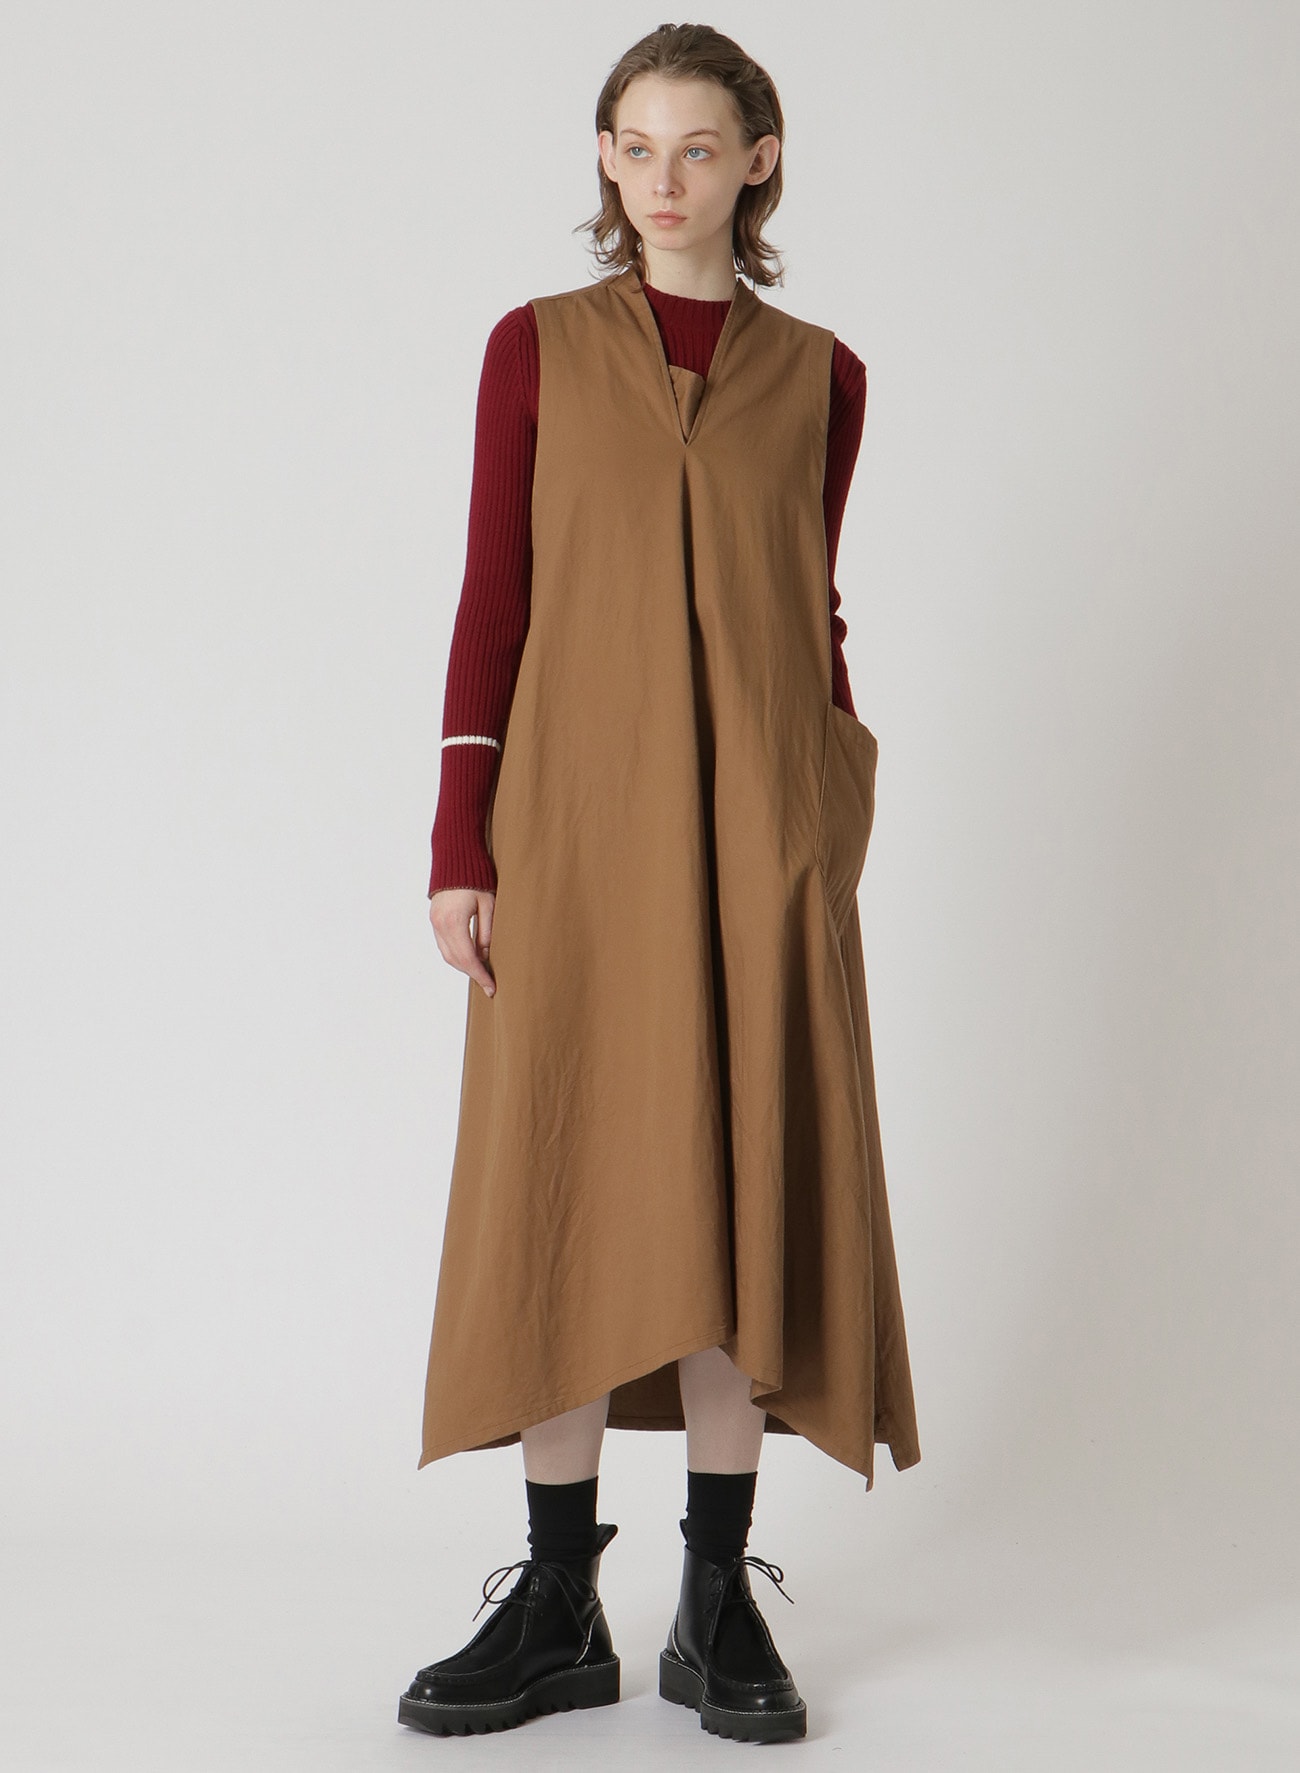 Y's BORN PRODUCT] COTTON TWILL V-NECK DRESS(S Brown): Y's｜THE 